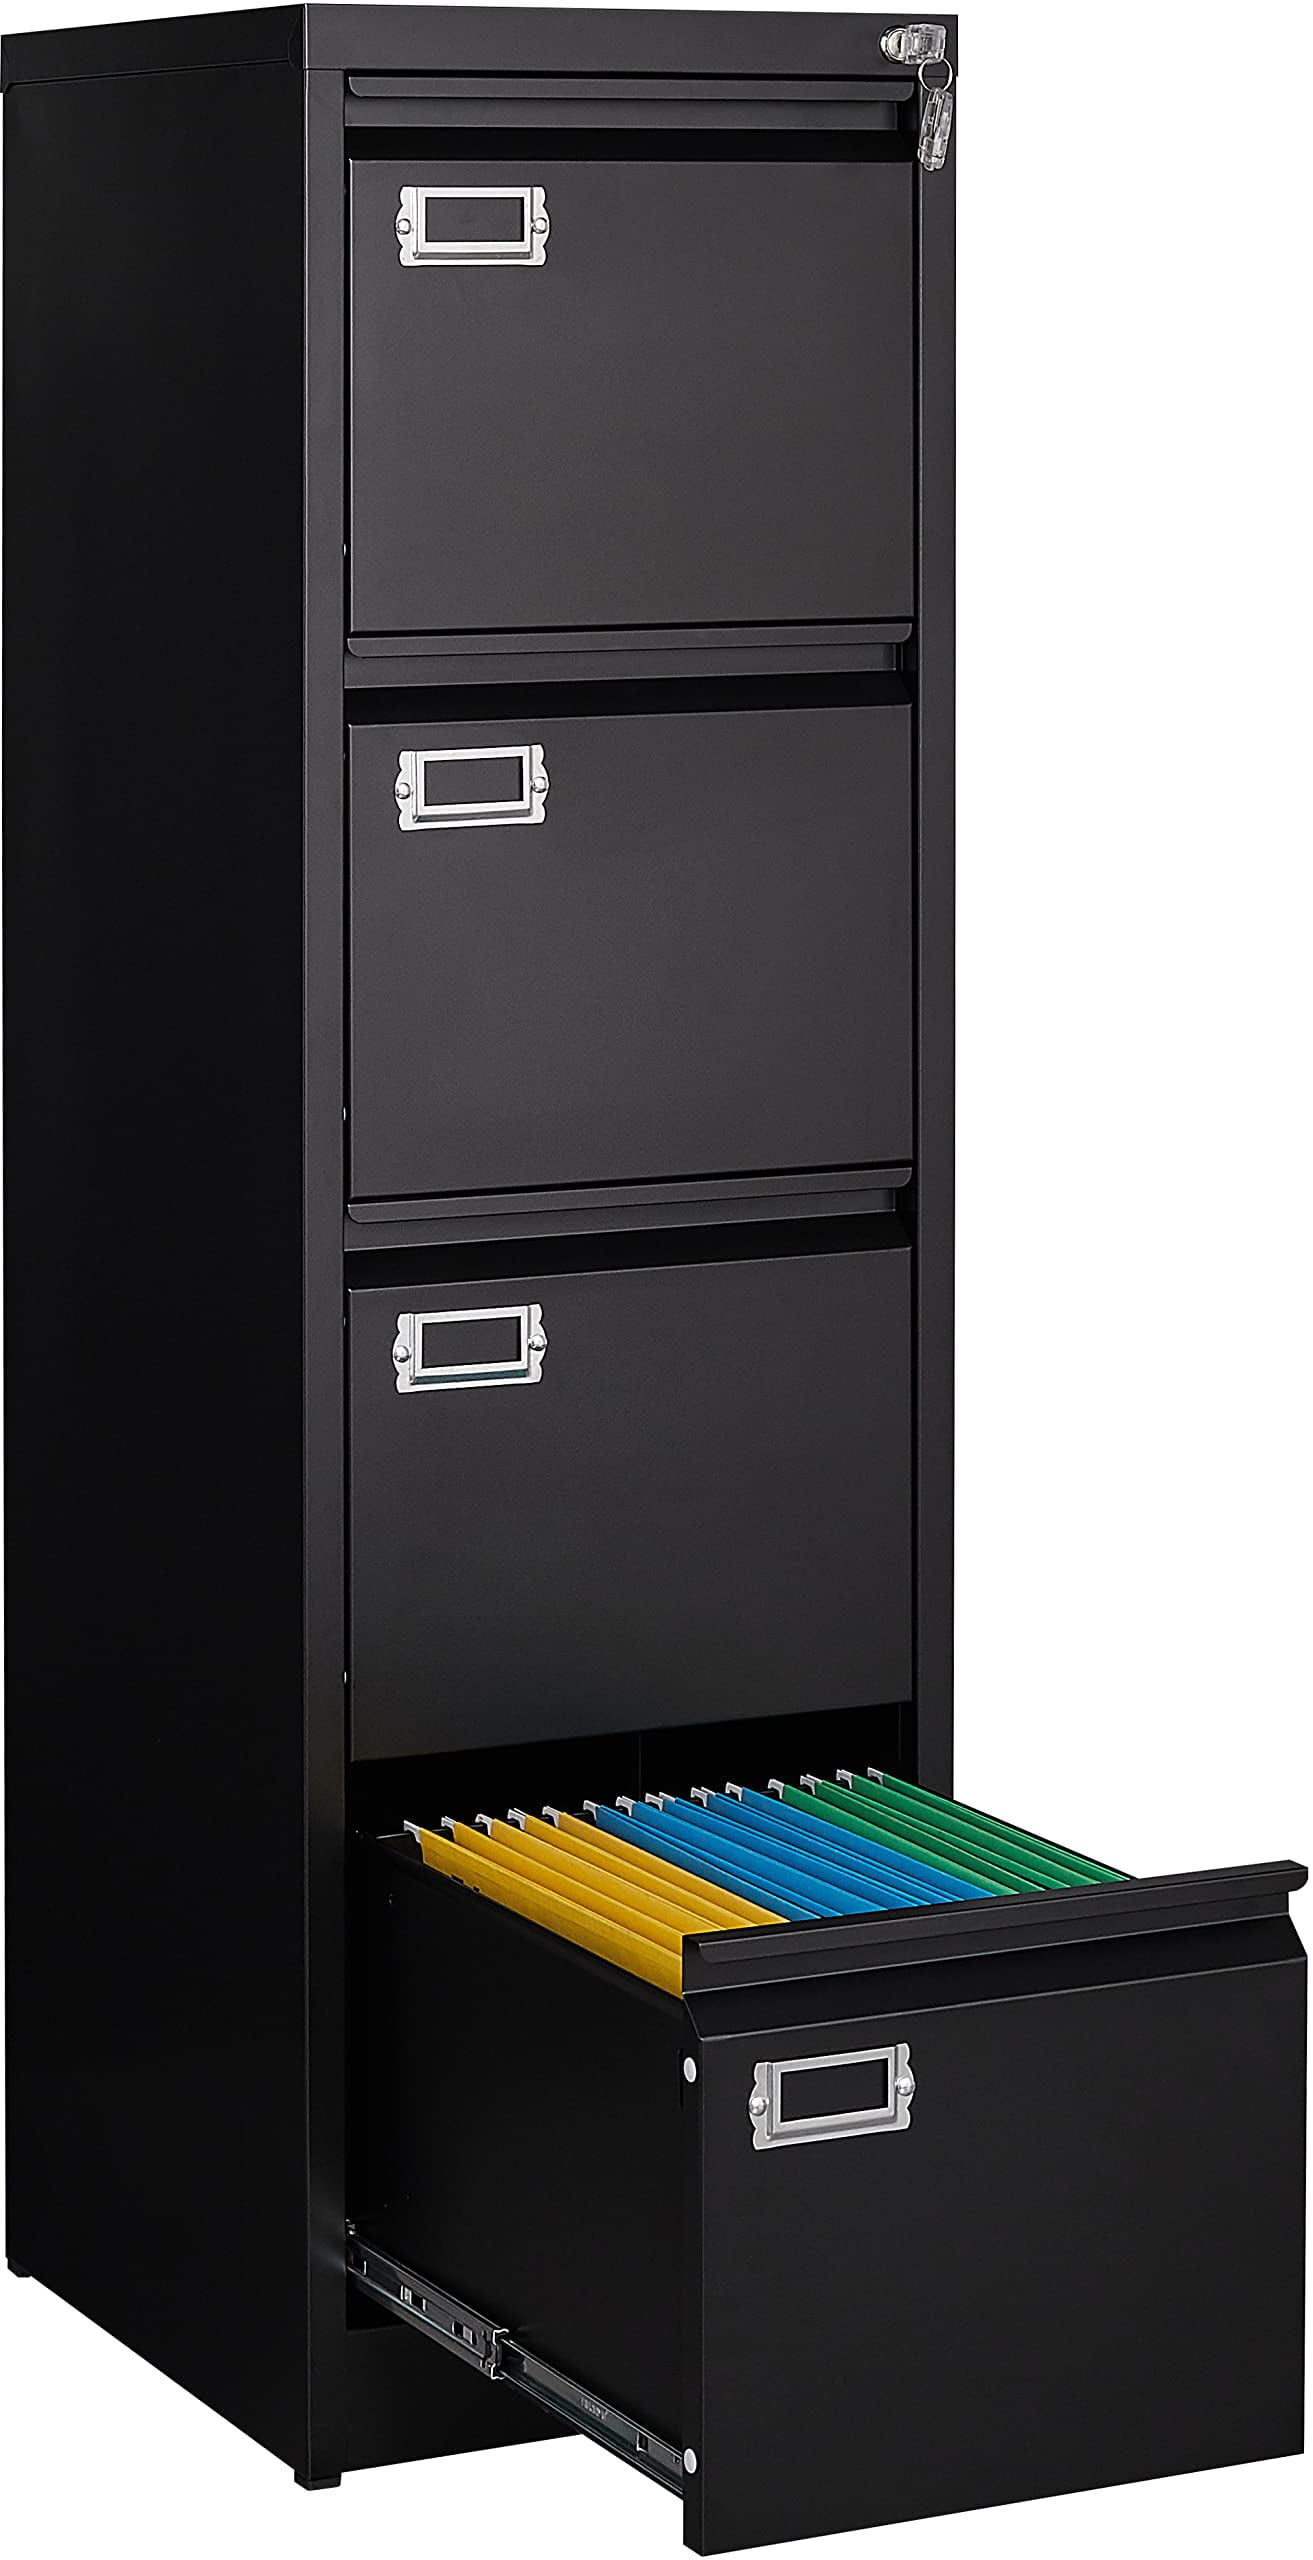 STANI 4 Drawer File Cabinet with Lock, Black Vertical Metal Filing Cabinets  Home Office Storage File Cabinet for Hanging Files Folders Letter/Legal/A4